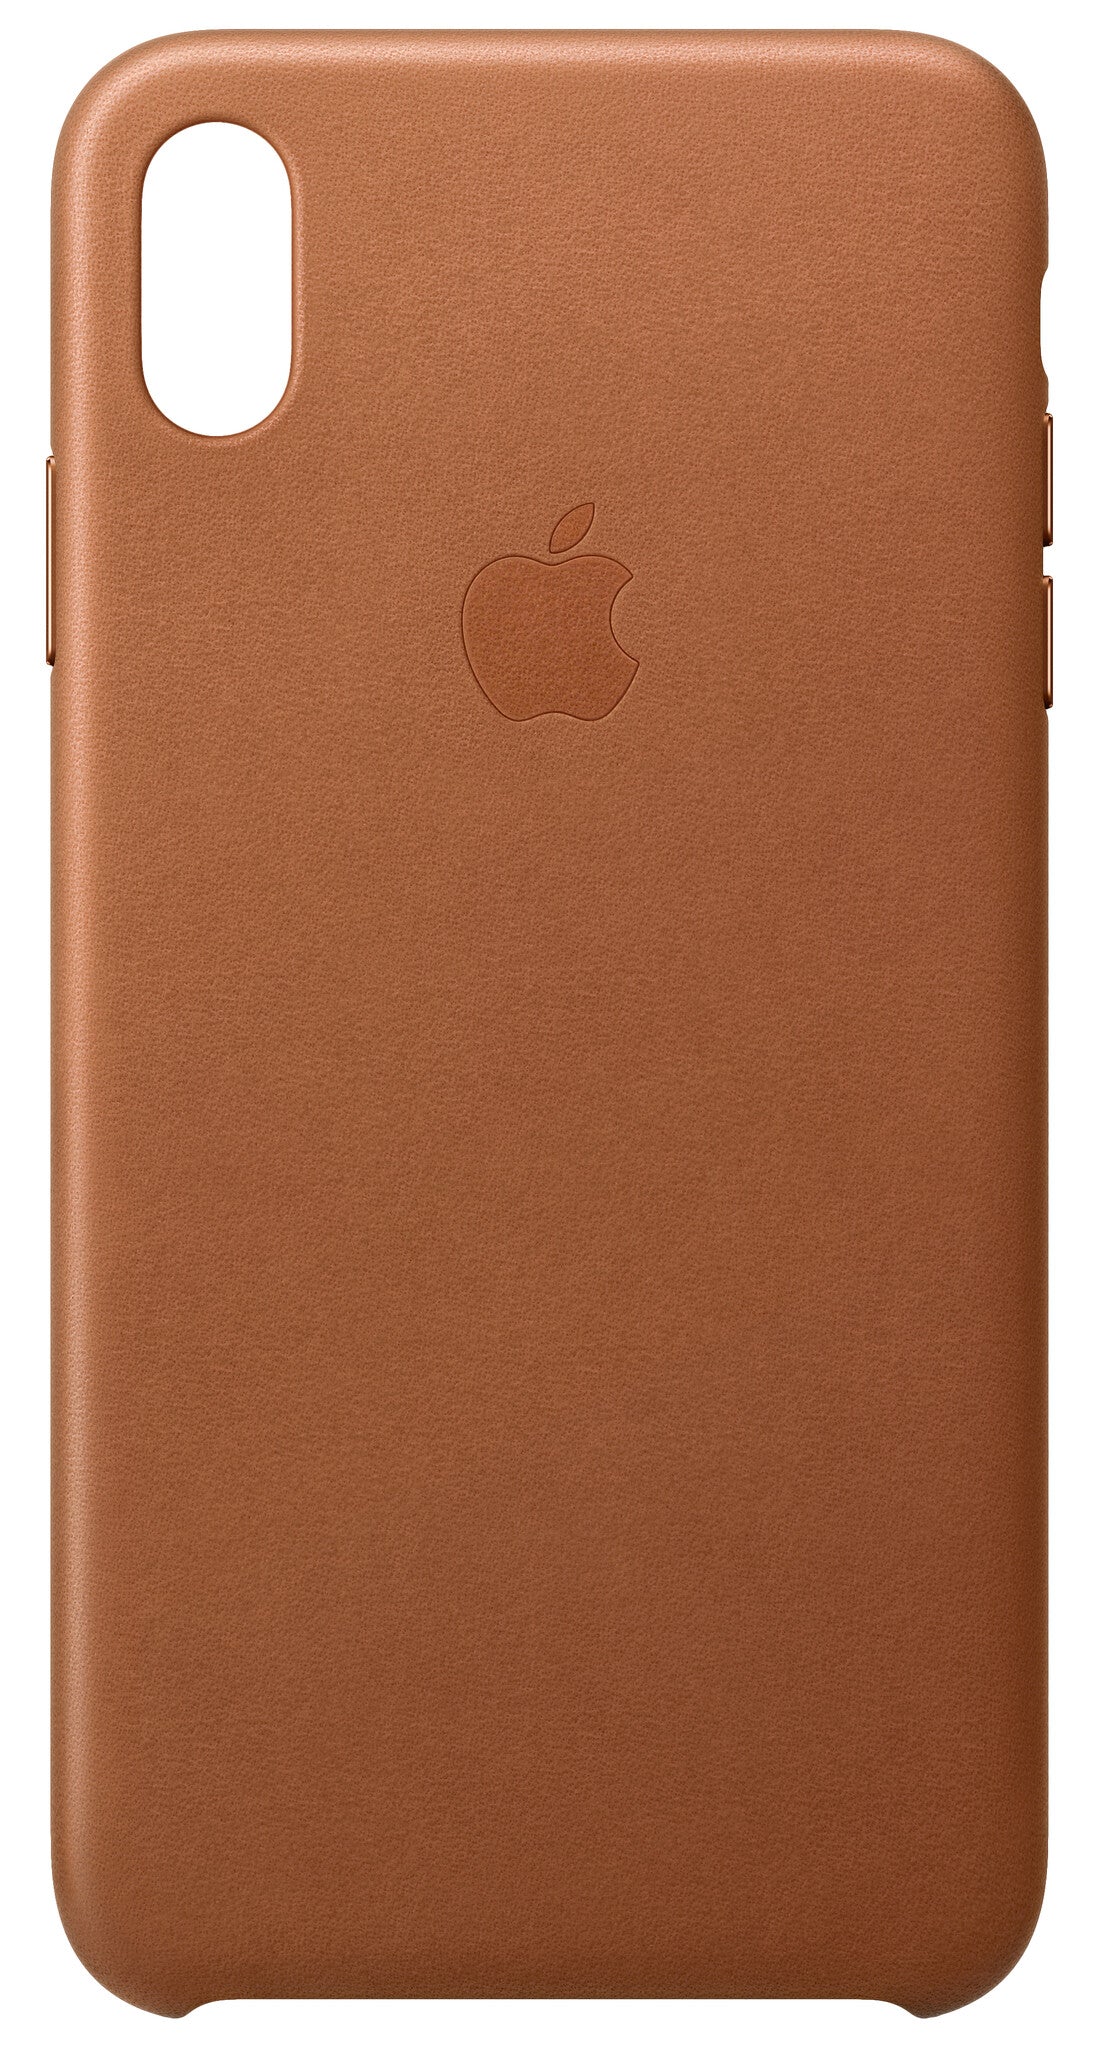 Apple mobile phone case for iPhone XS Max in Brown